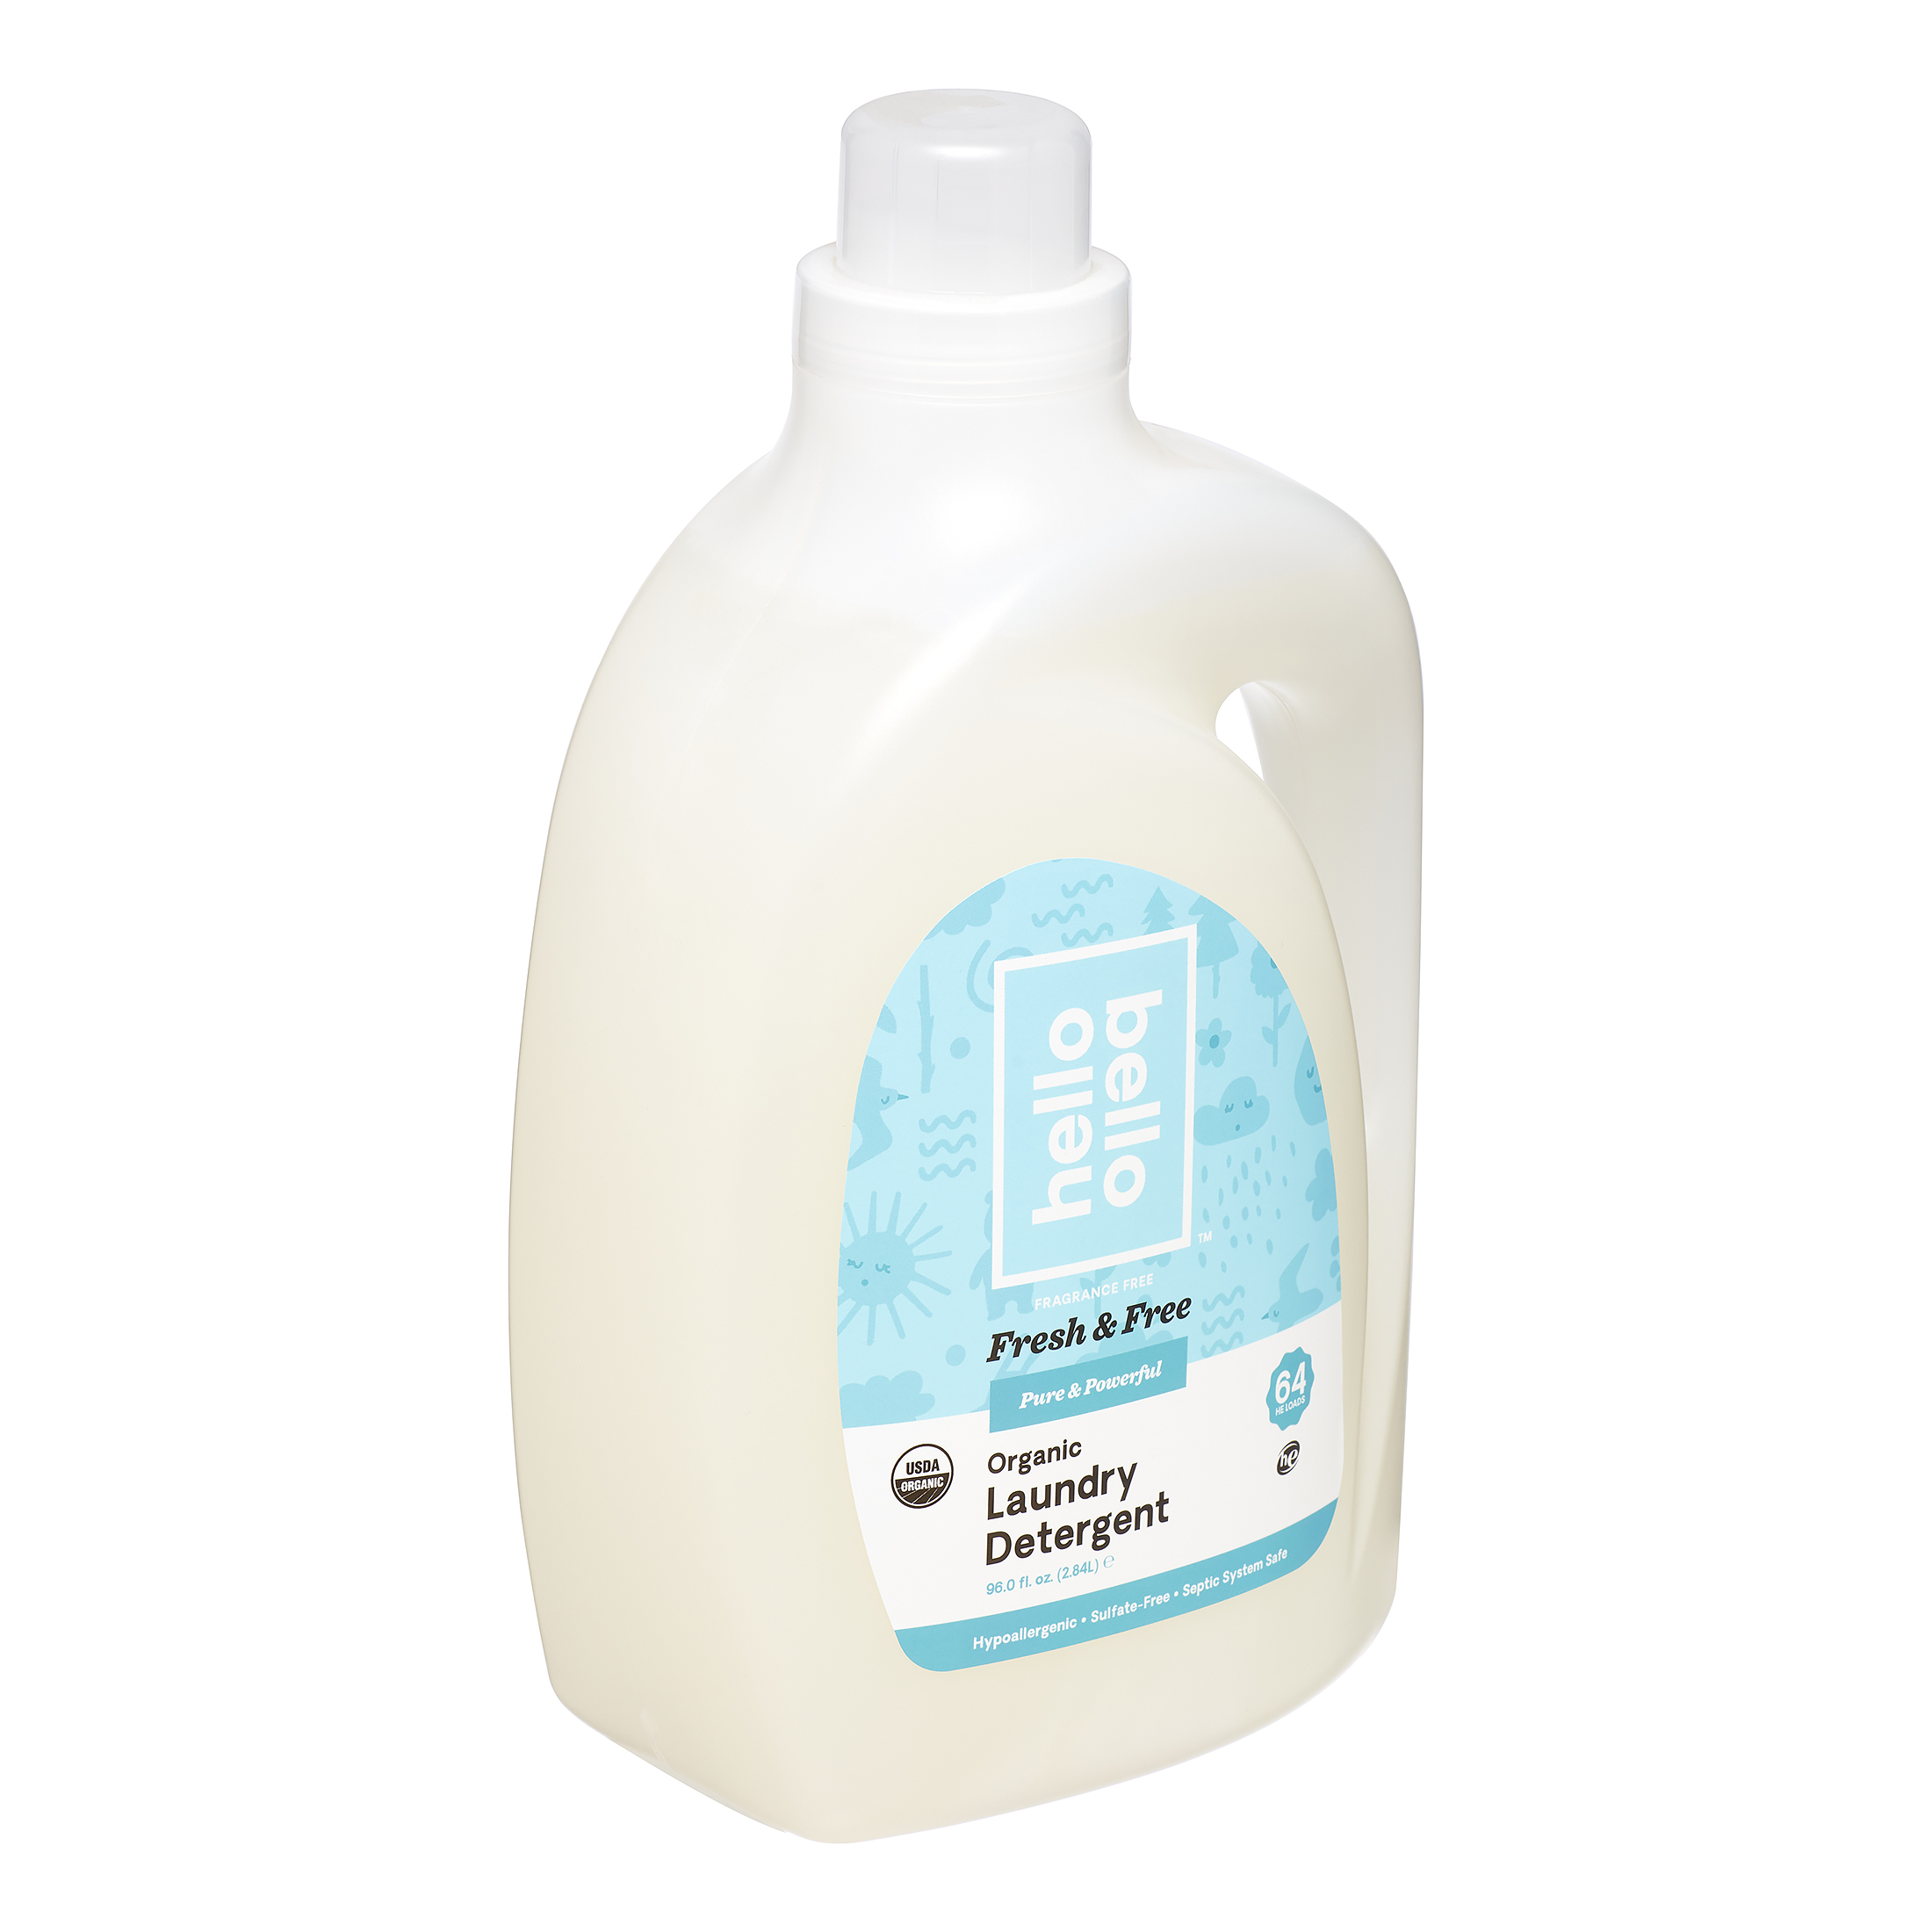 Hello Bello Organic Laundry Detergent, Unscented, 96 fl oz - image 3 of 5